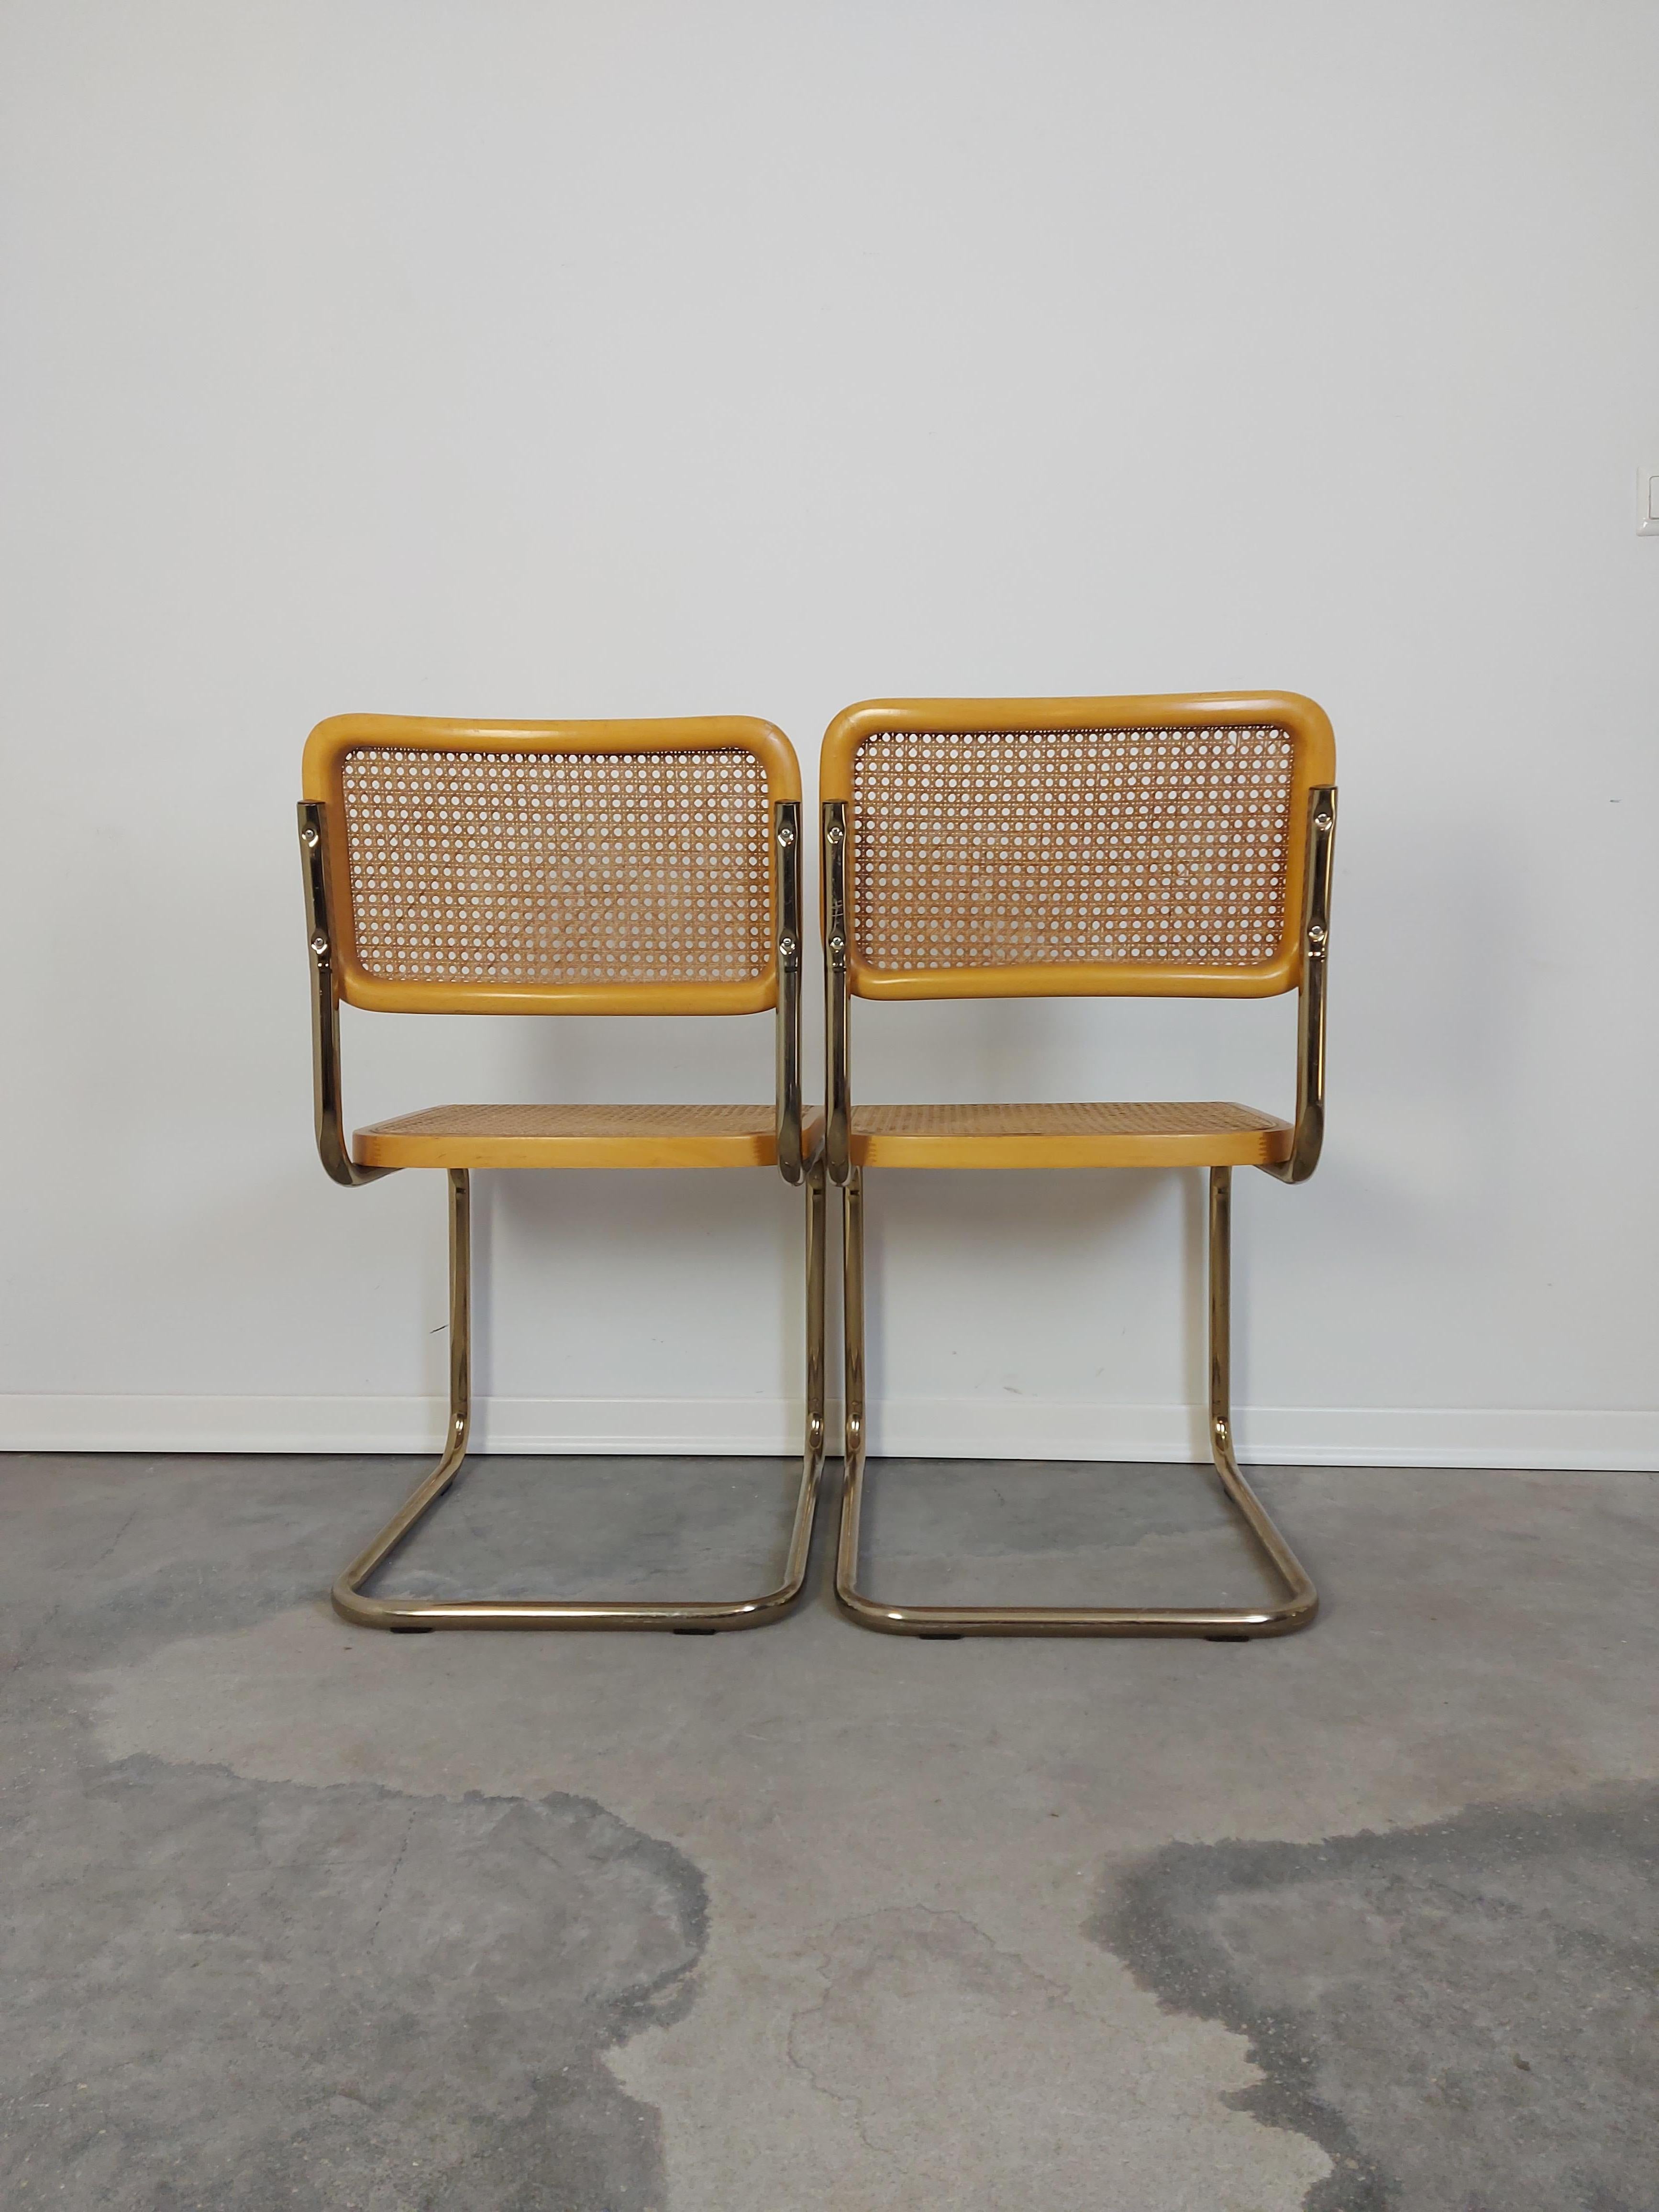 Late 20th Century CESCA Chair, 1980s, Pair Design Classic with Gilded Frame